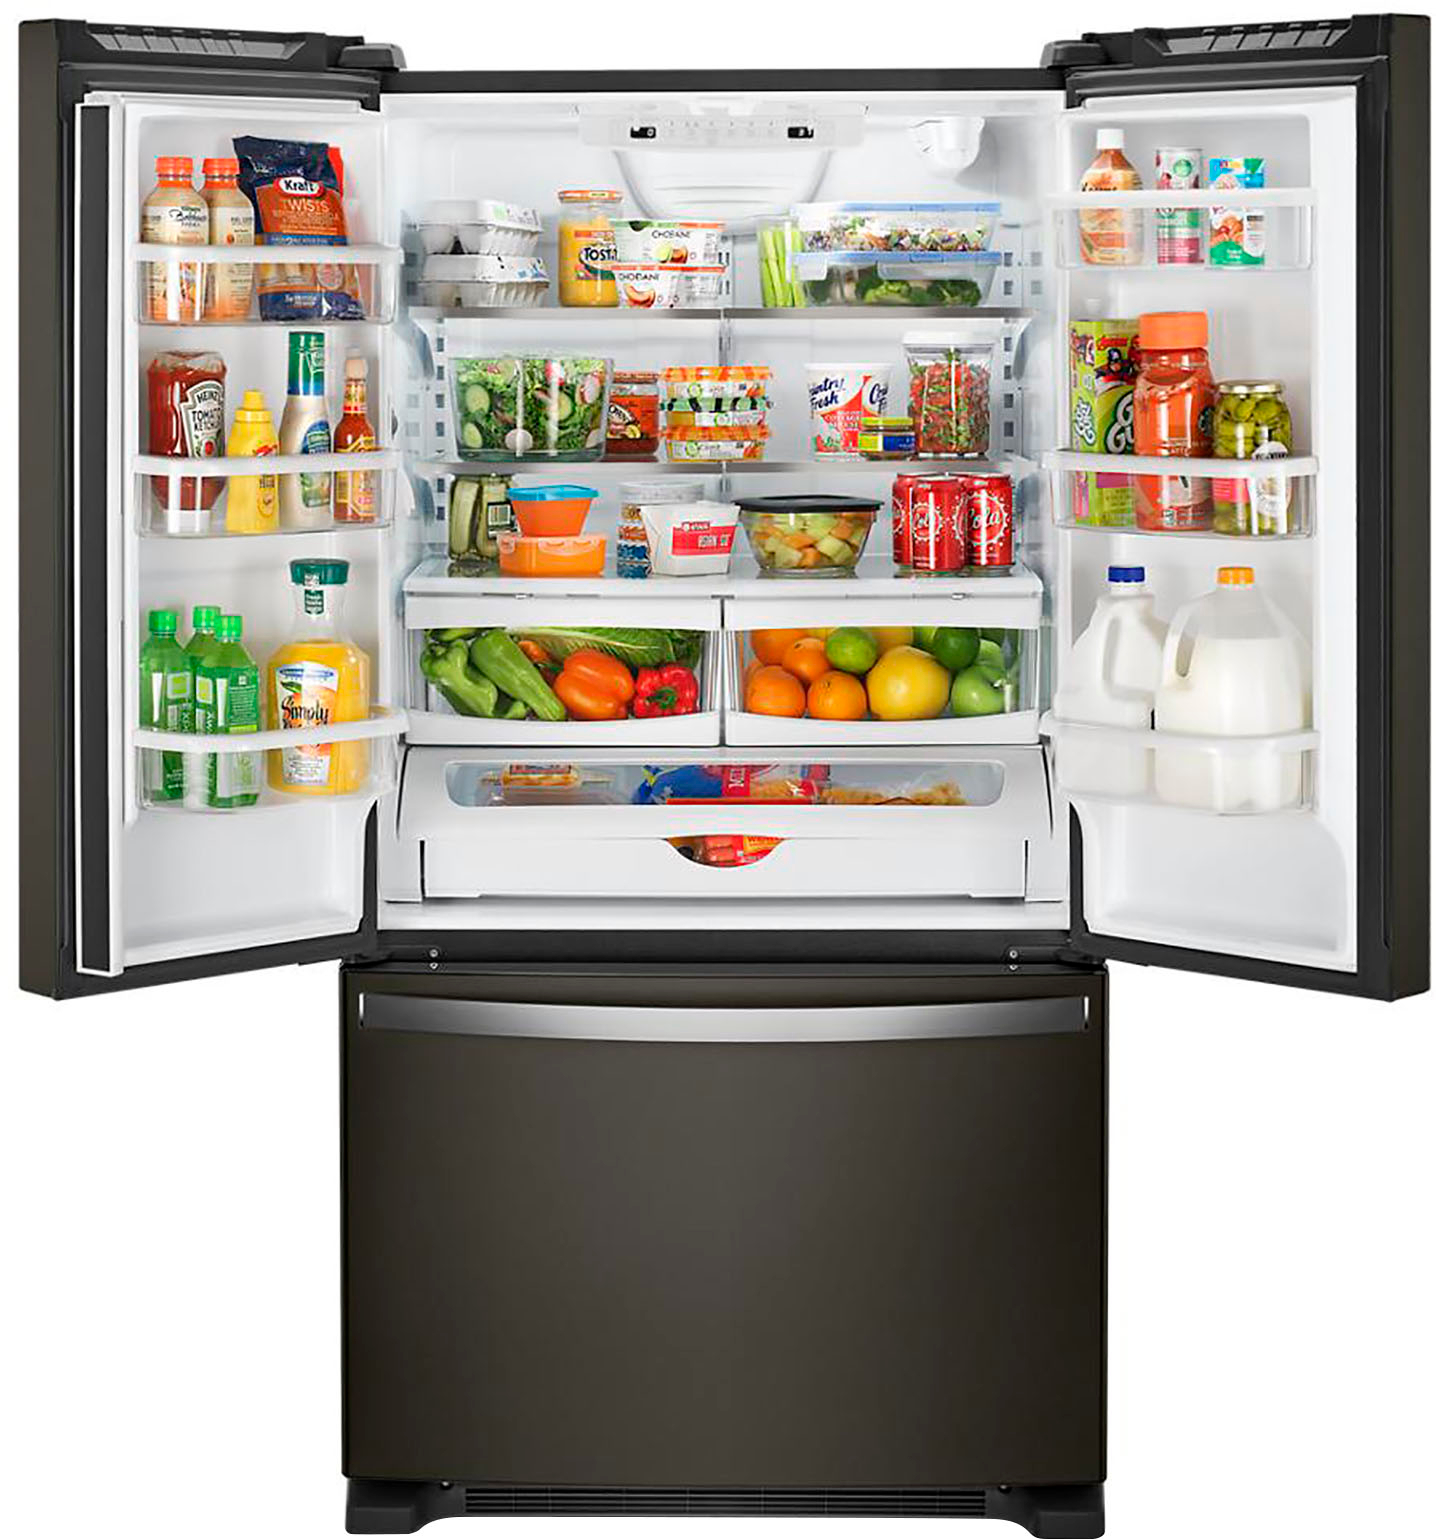 Whirlpool 25.2 Cu. Ft. French Door Refrigerator with Internal Water ...